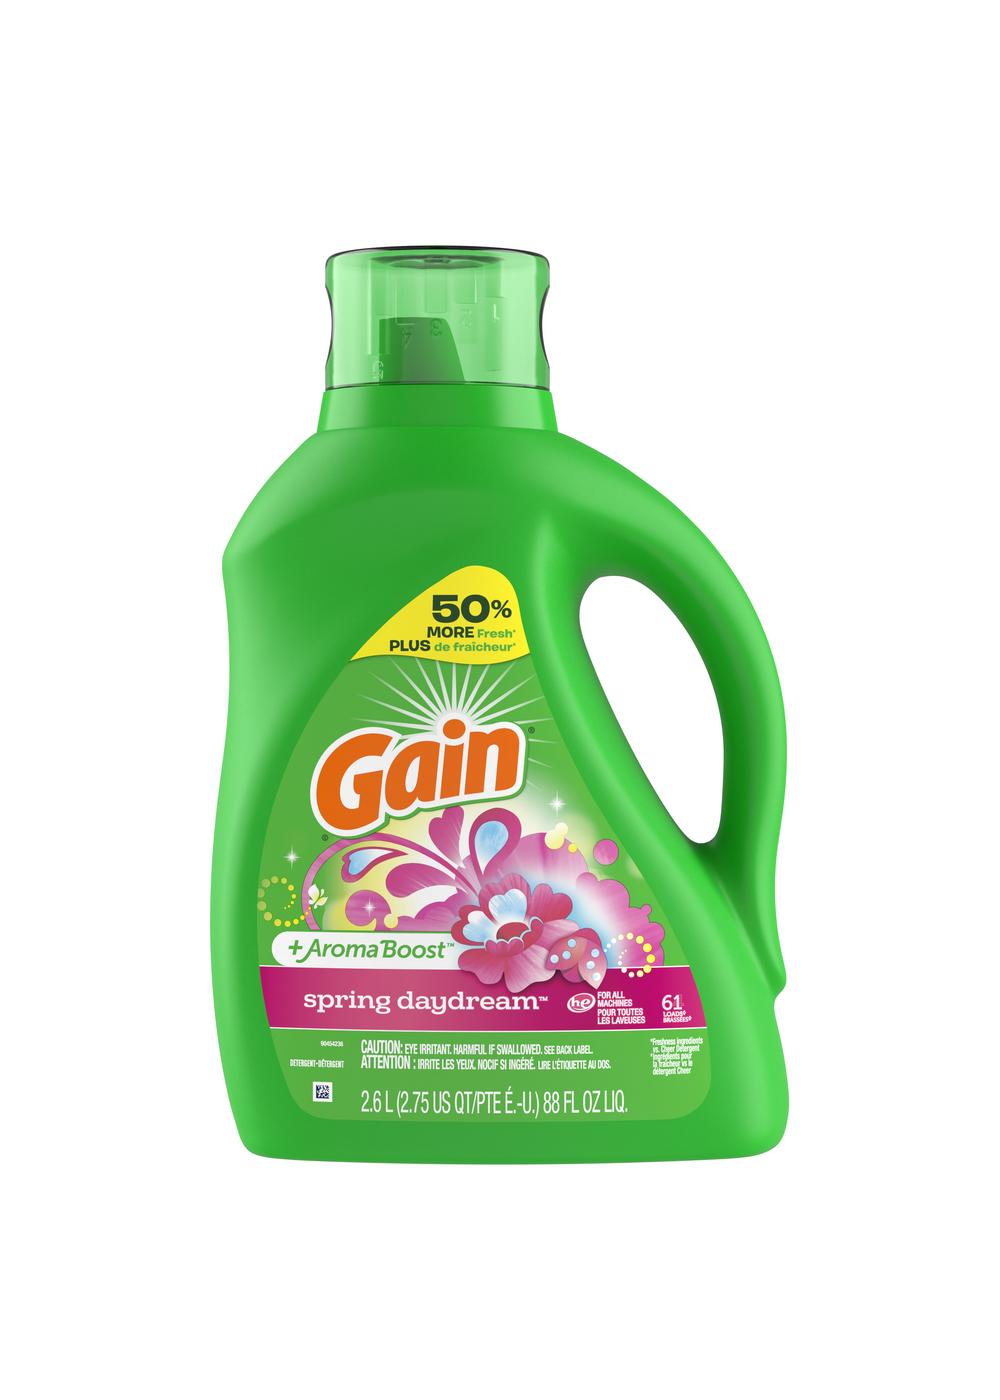 Gain + Aroma Boost HE Liquid Laundry Detergent, 61 Loads - Spring Daydream; image 1 of 8